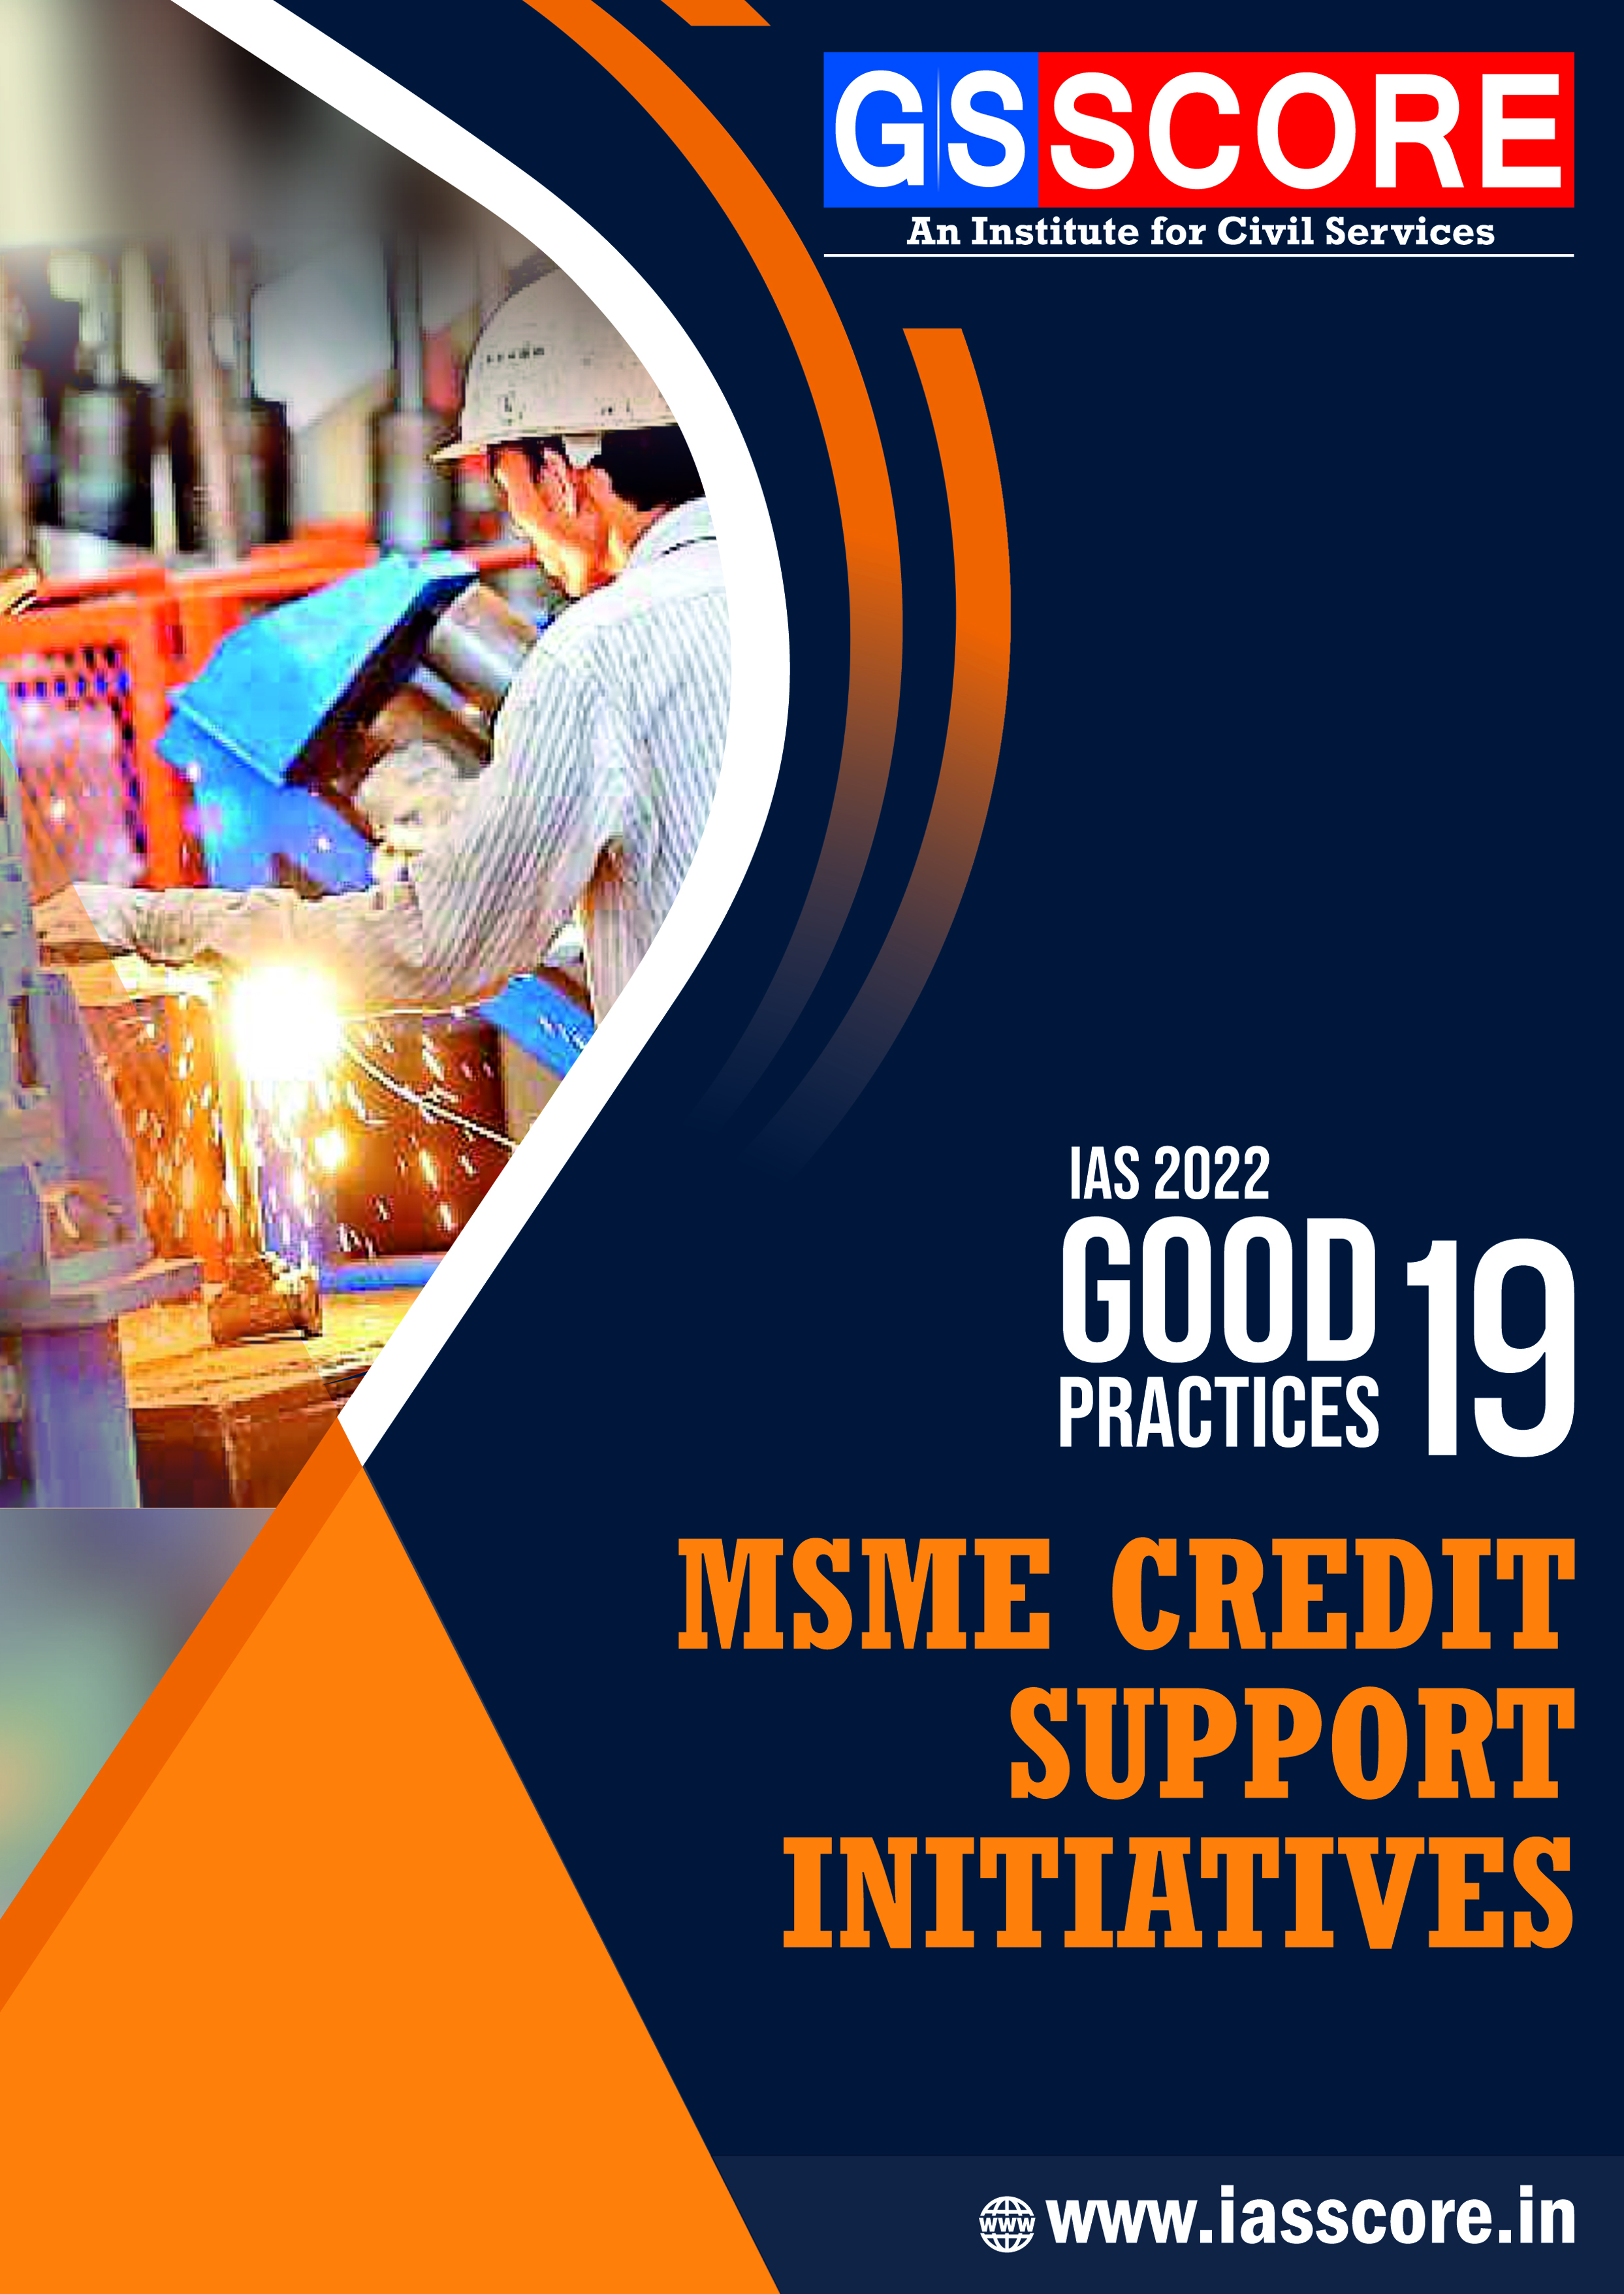 Good Practices: ‘MSME - Credit Support Initiatives’